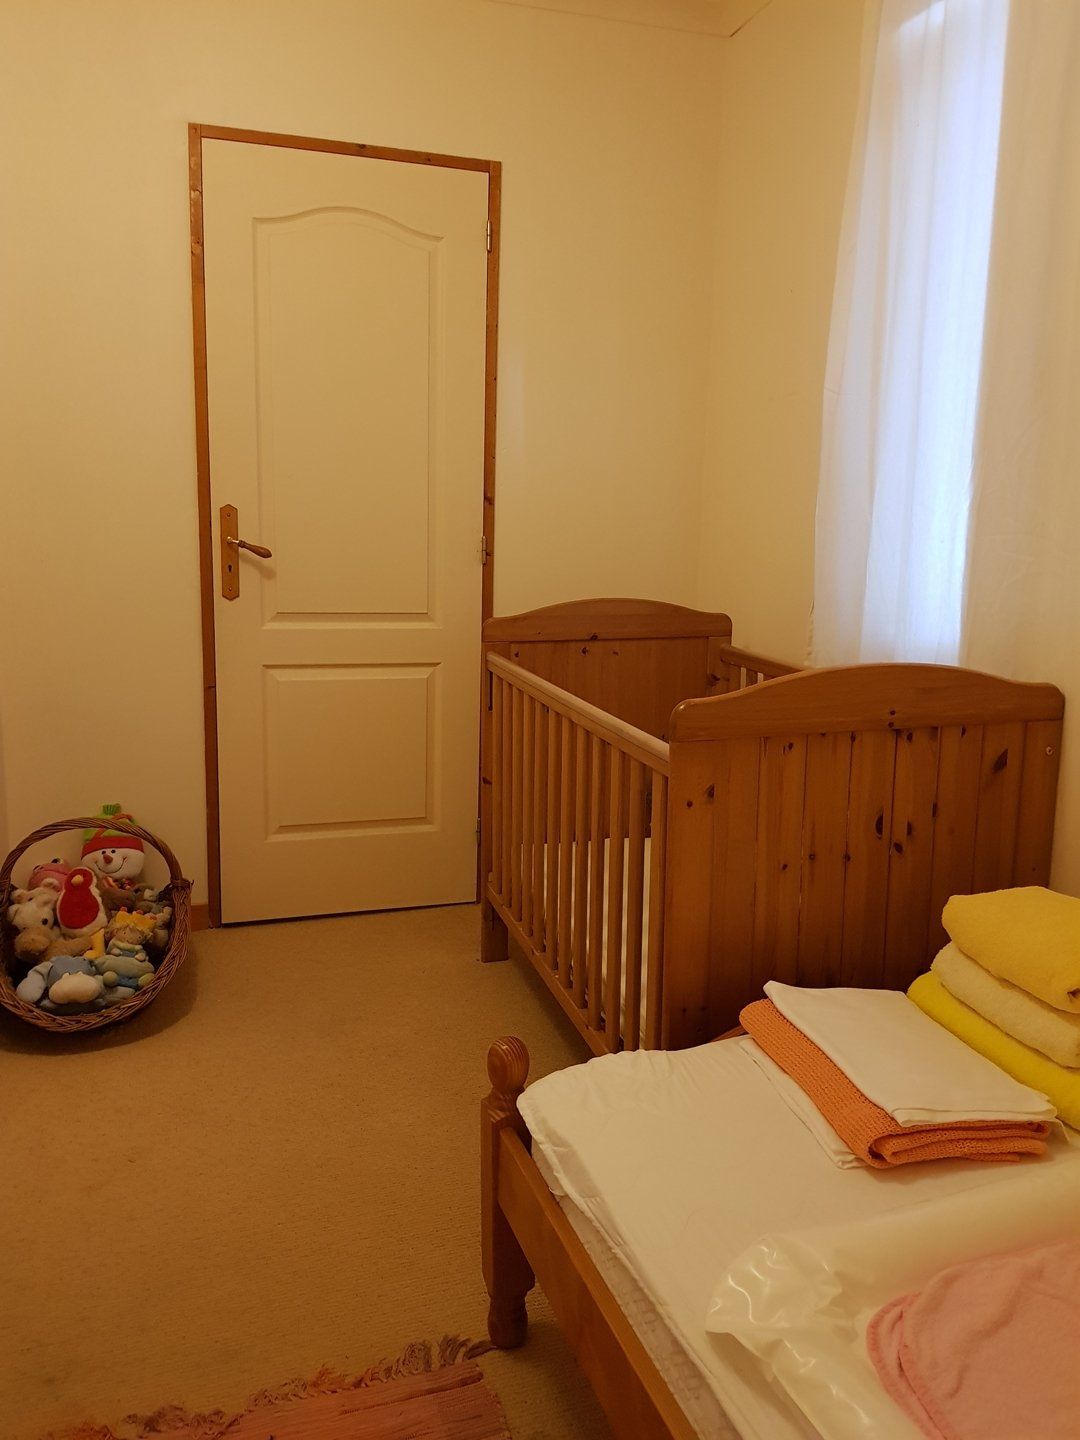 childrens room with wooden cot